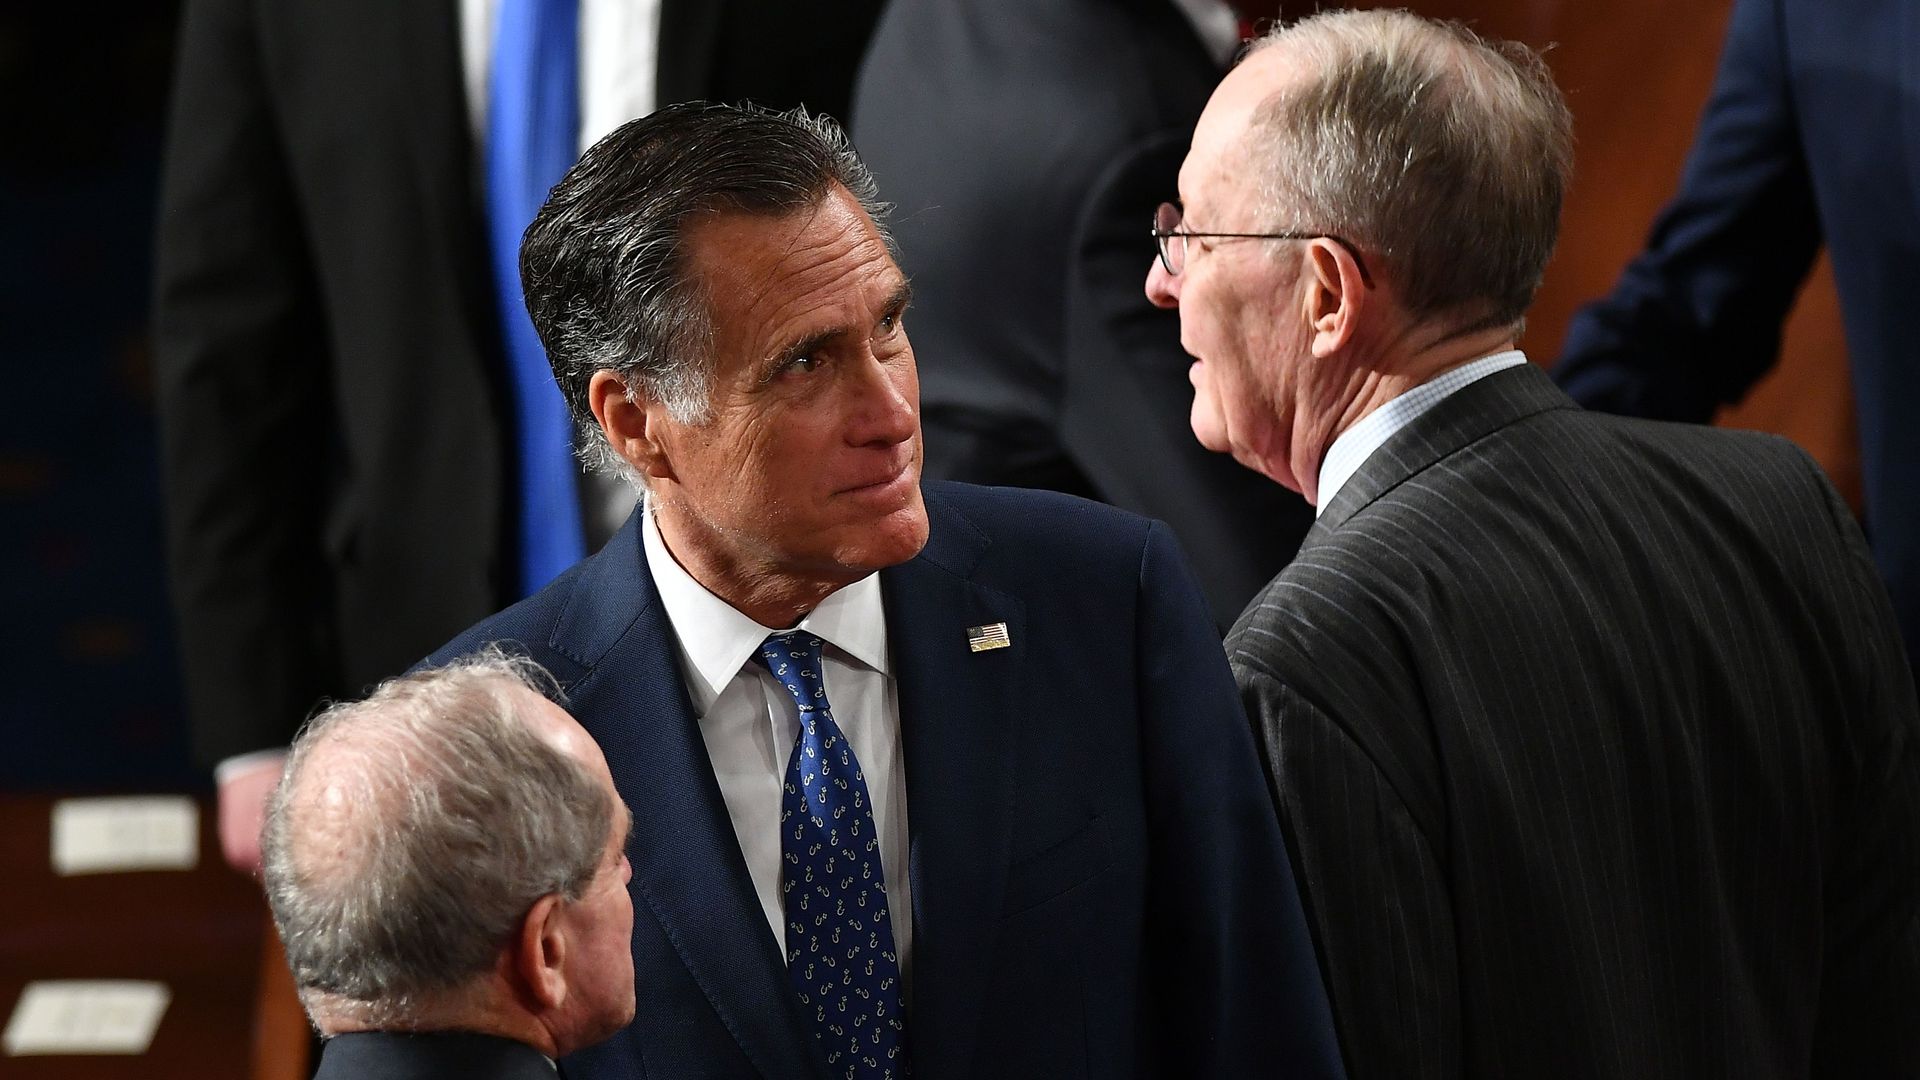 In this image, Mitt Romney stands in the Capitol during the impeachment trial next to two other senators